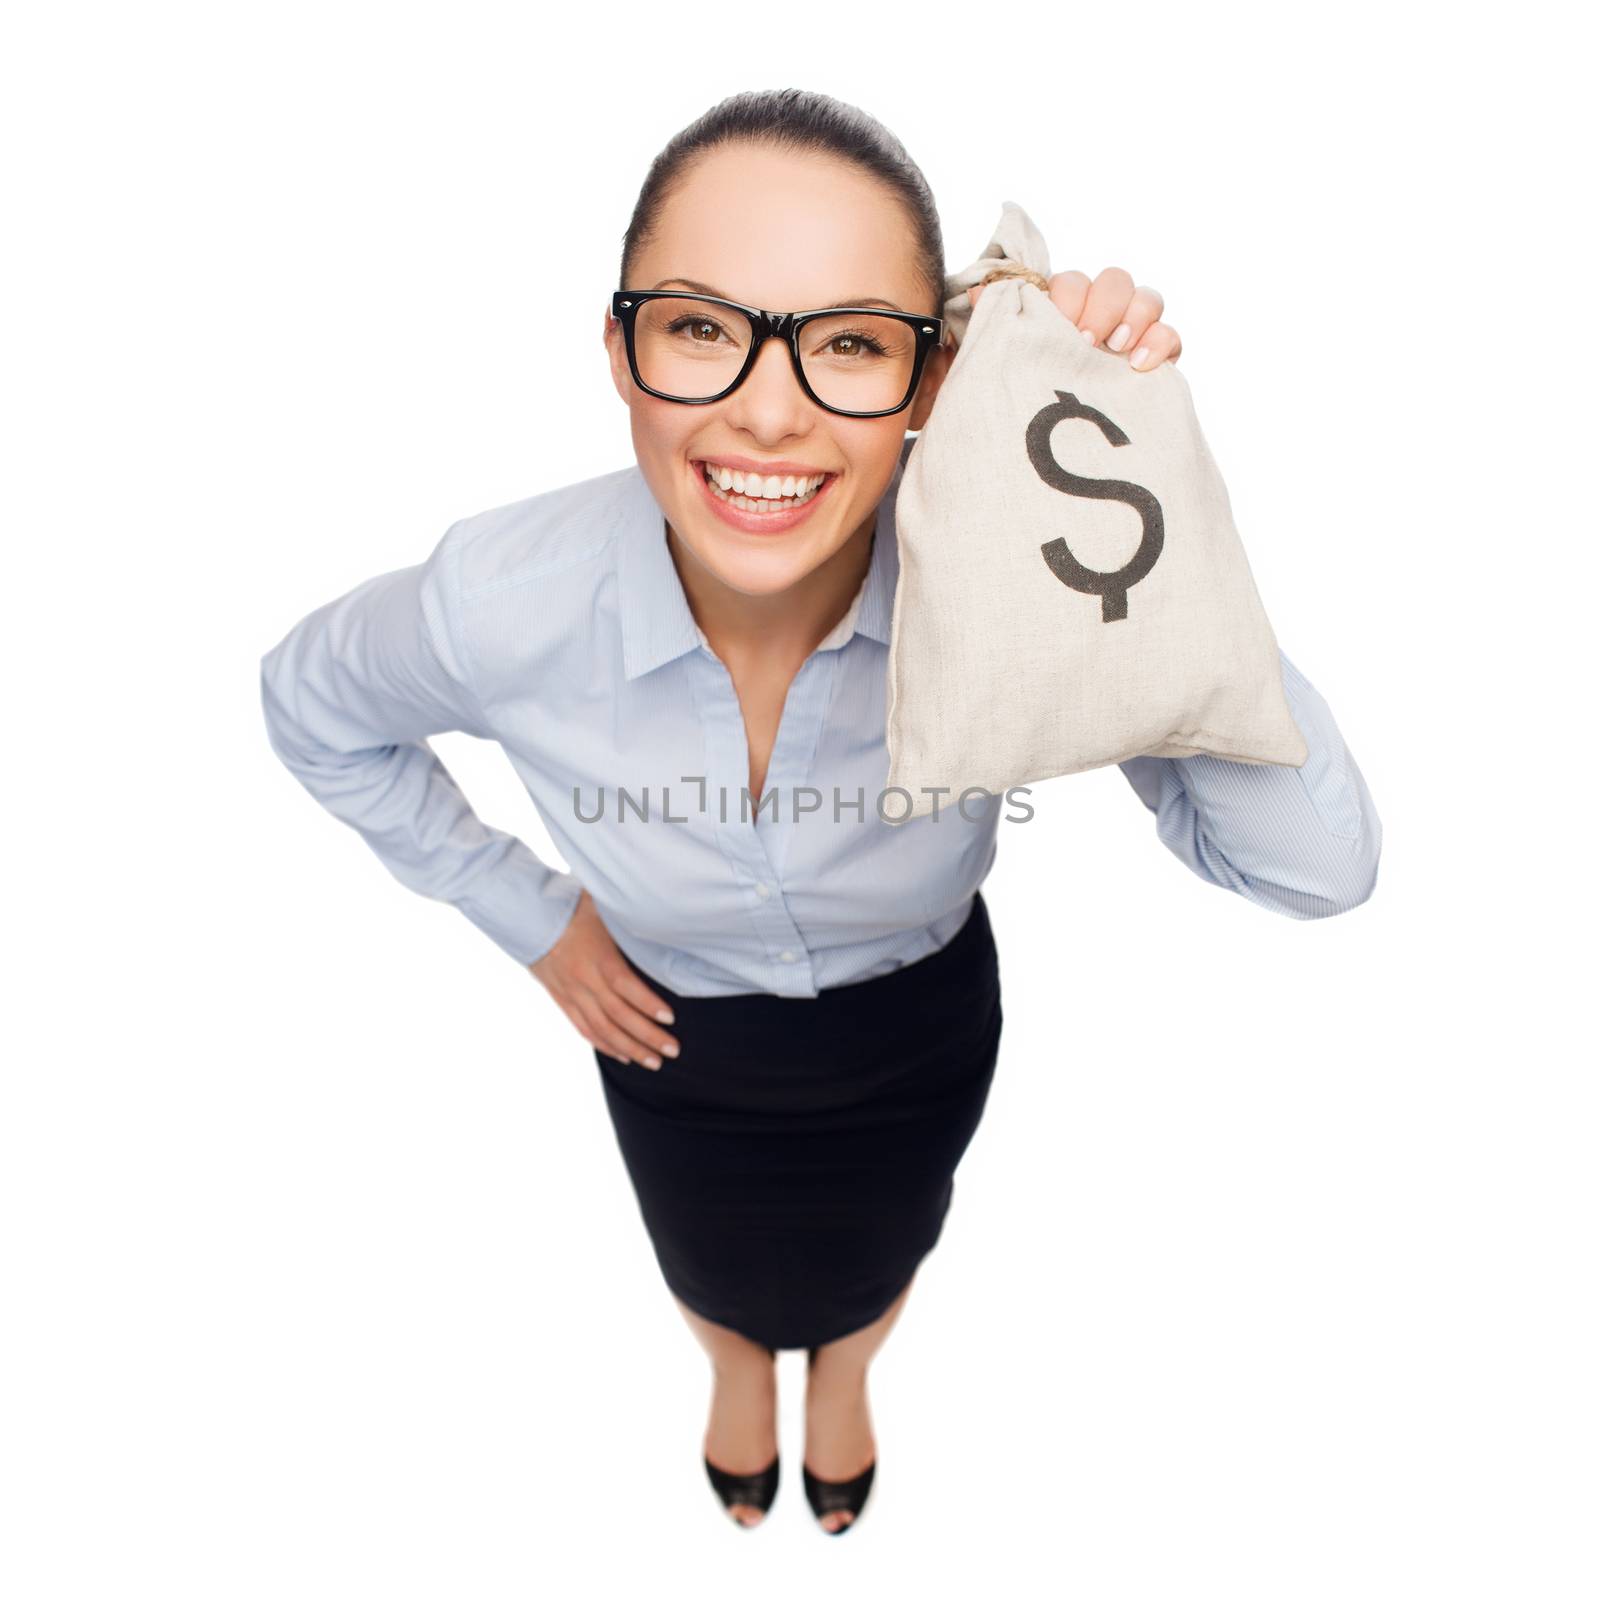 business, money and office concept - smiling businesswoman in eyeglasses holding money bag with dollar